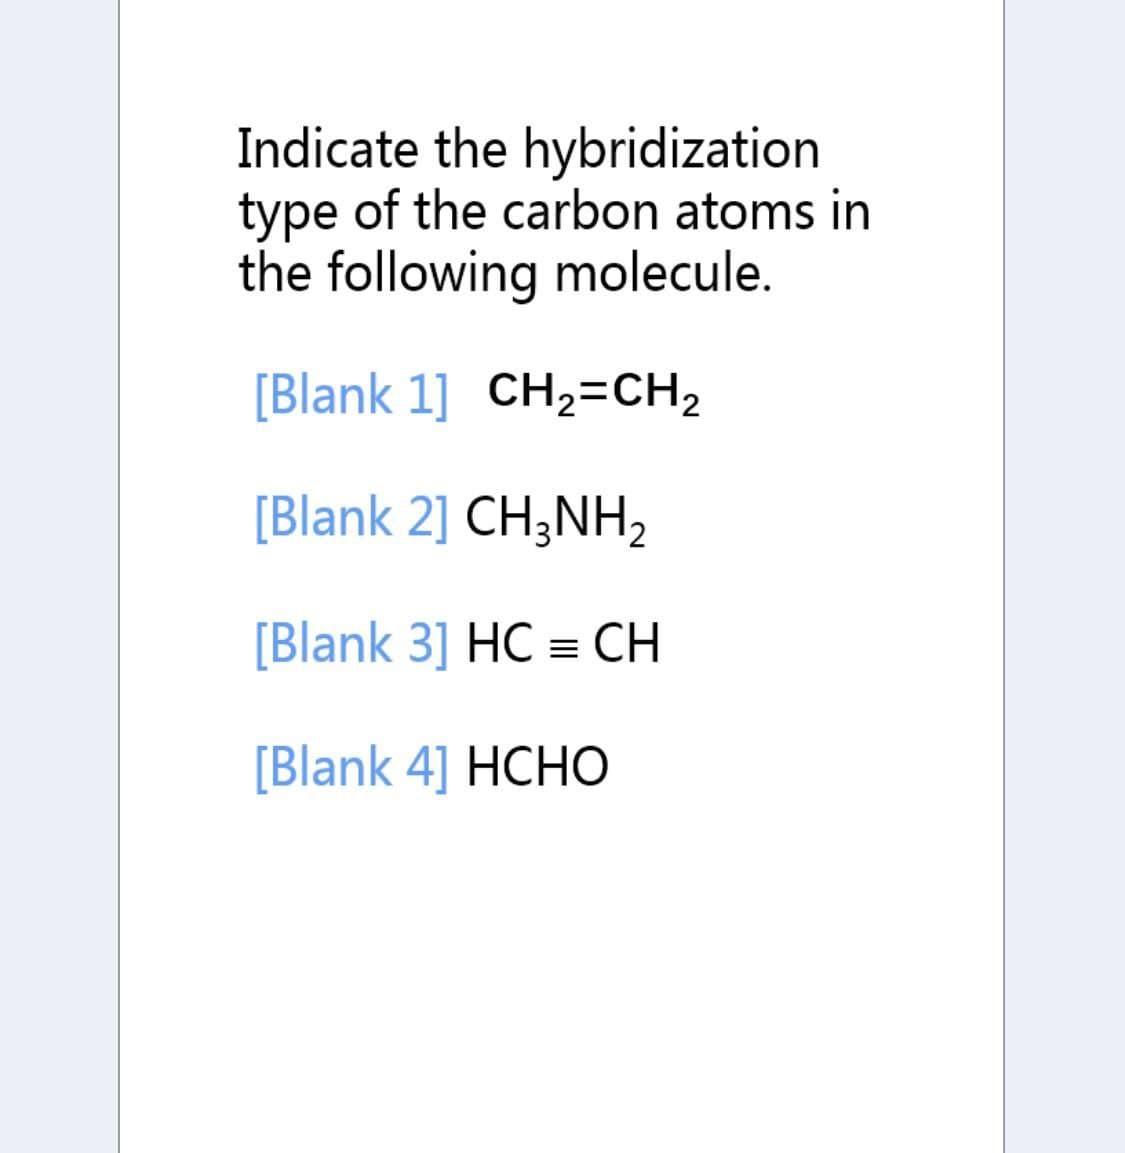 Indicate the hybridization
type of the carbon atoms in
the following molecule.
[Blank 1] CH,=CH2
[Blank 2] CH;NH,
[Blank 3] HC = CH
[Blank 4] HCHO
